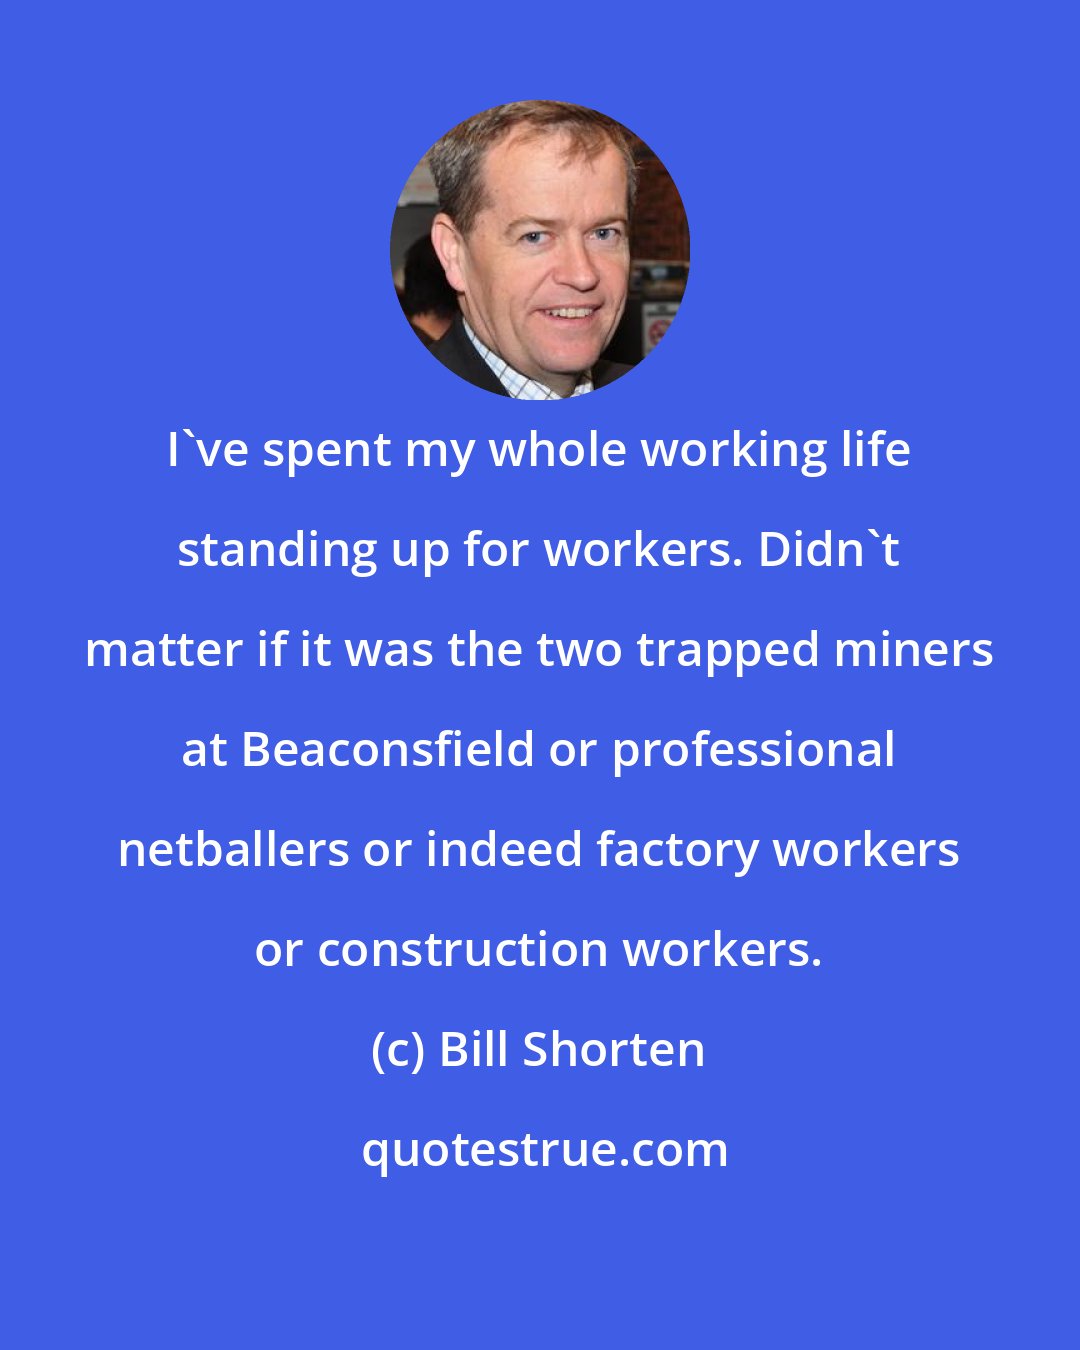 Bill Shorten: I've spent my whole working life standing up for workers. Didn't matter if it was the two trapped miners at Beaconsfield or professional netballers or indeed factory workers or construction workers.